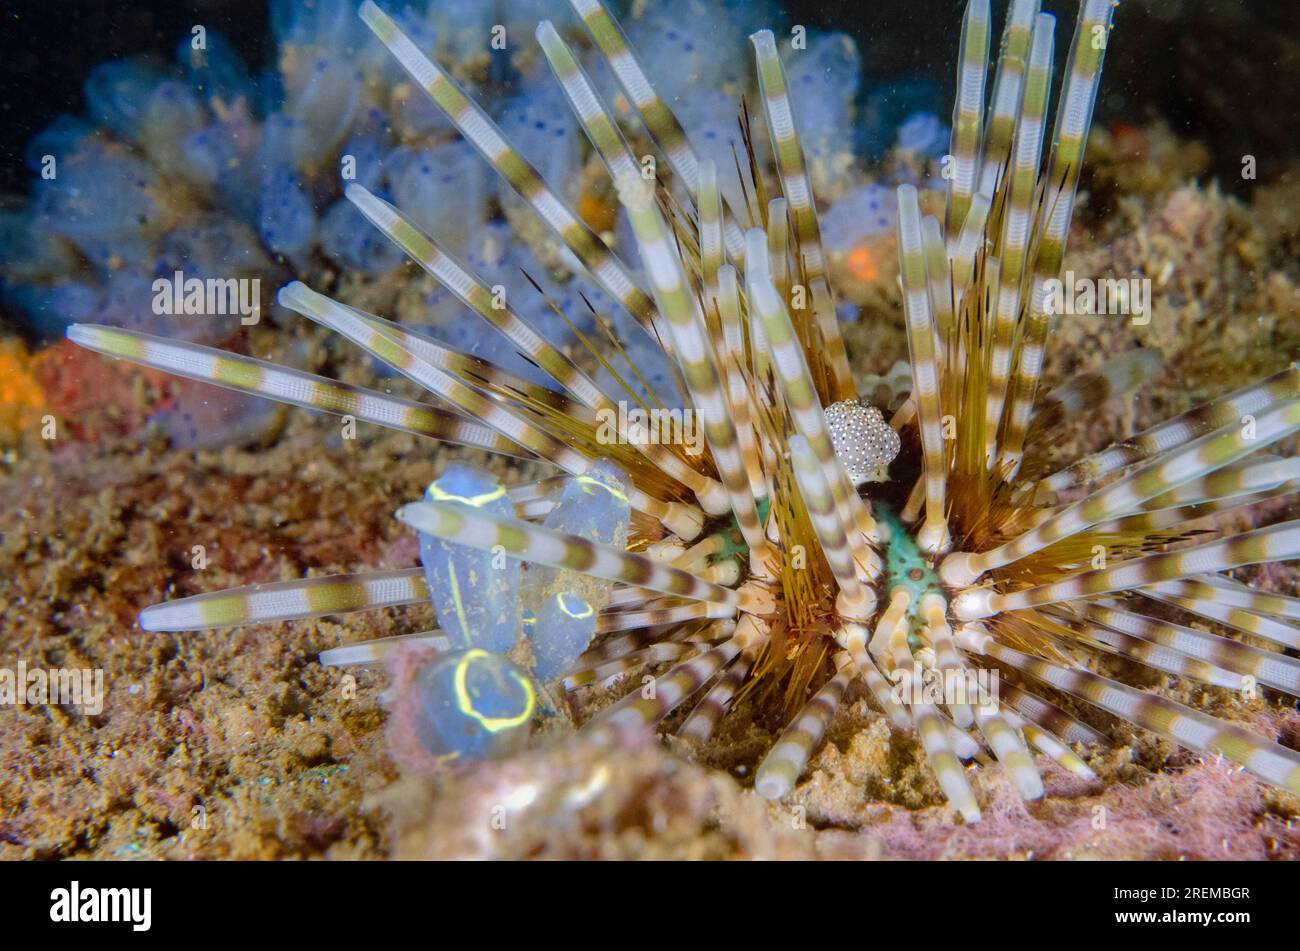 Double-spined Urchin, Echinothrix calamaris, with Sea Squirts, Clavelina sp, Secret Bay dive site, Gilimanuk, Jembrana Regency, Bali, Indonesia Stock Photo